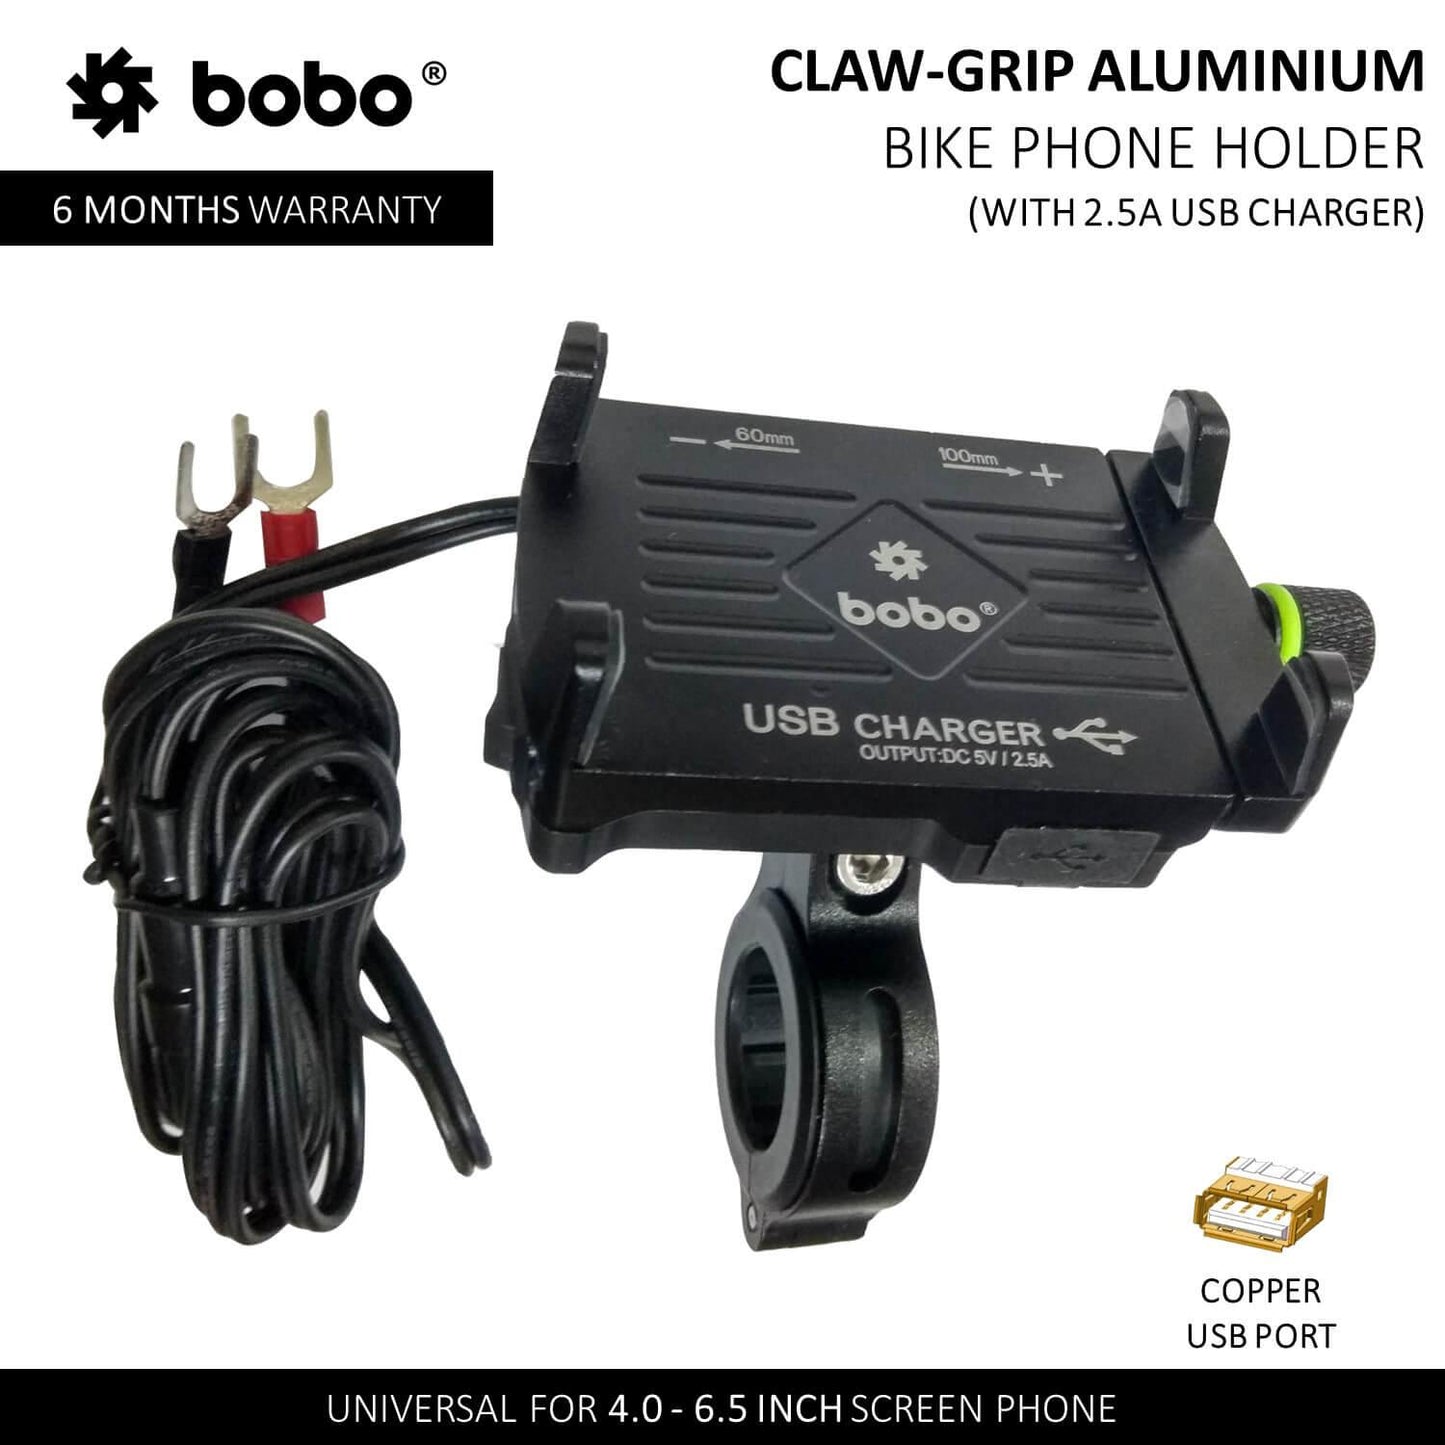 Bobo Claw Grip Aluminium Bike Phone Holder (with 2.5A USB charger) Motorcycle Mobile Mount - Moto Modz